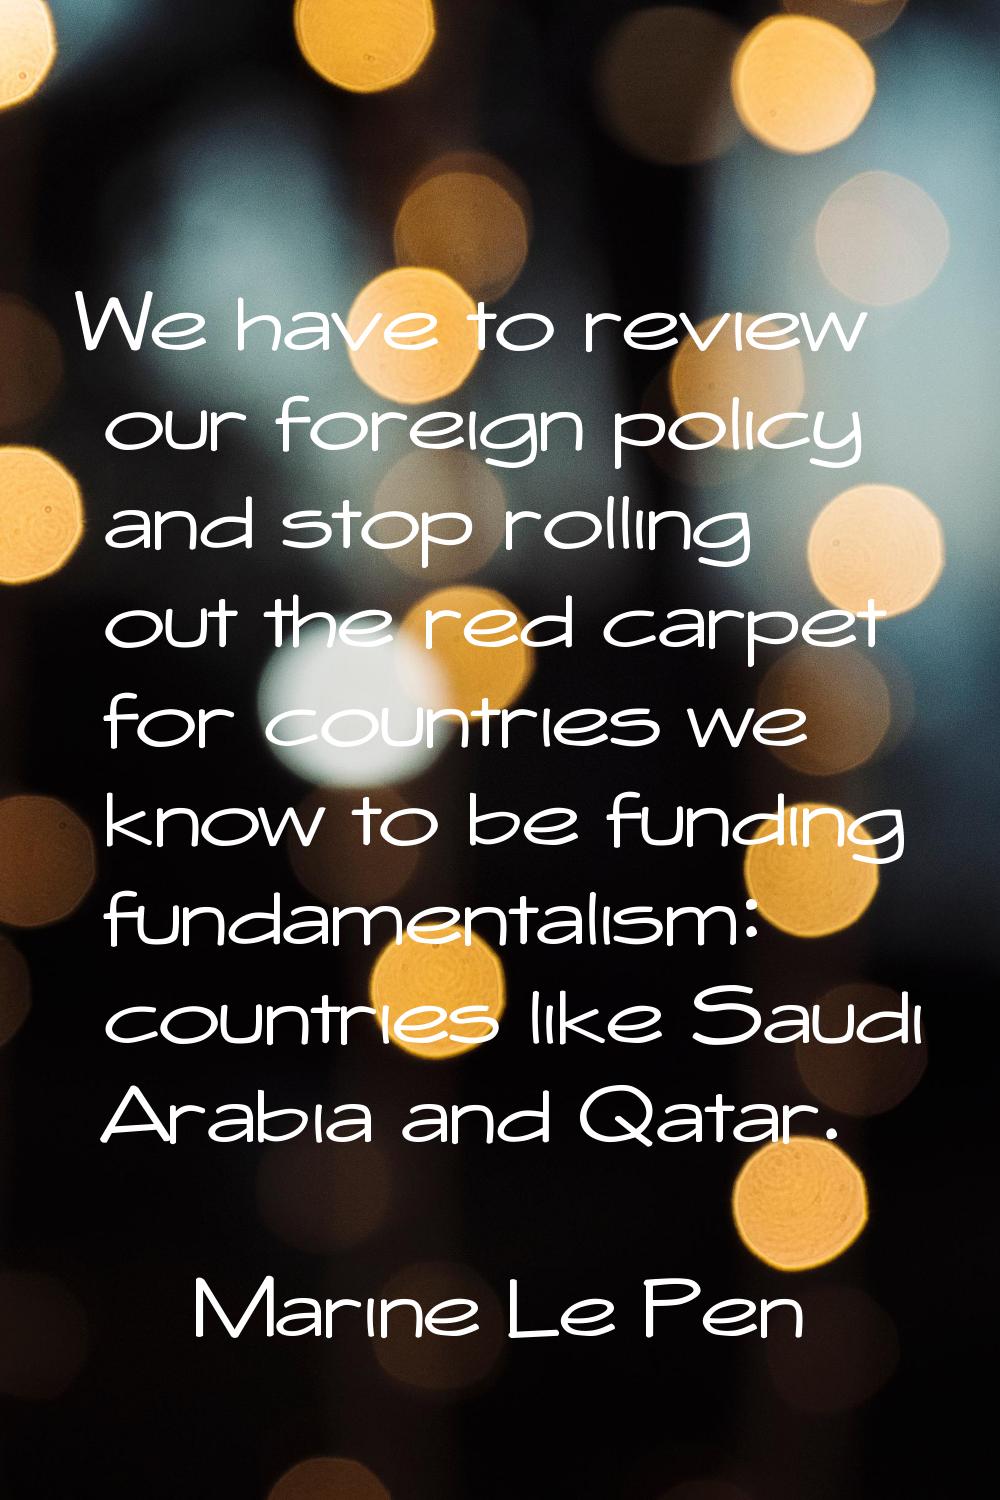 We have to review our foreign policy and stop rolling out the red carpet for countries we know to b